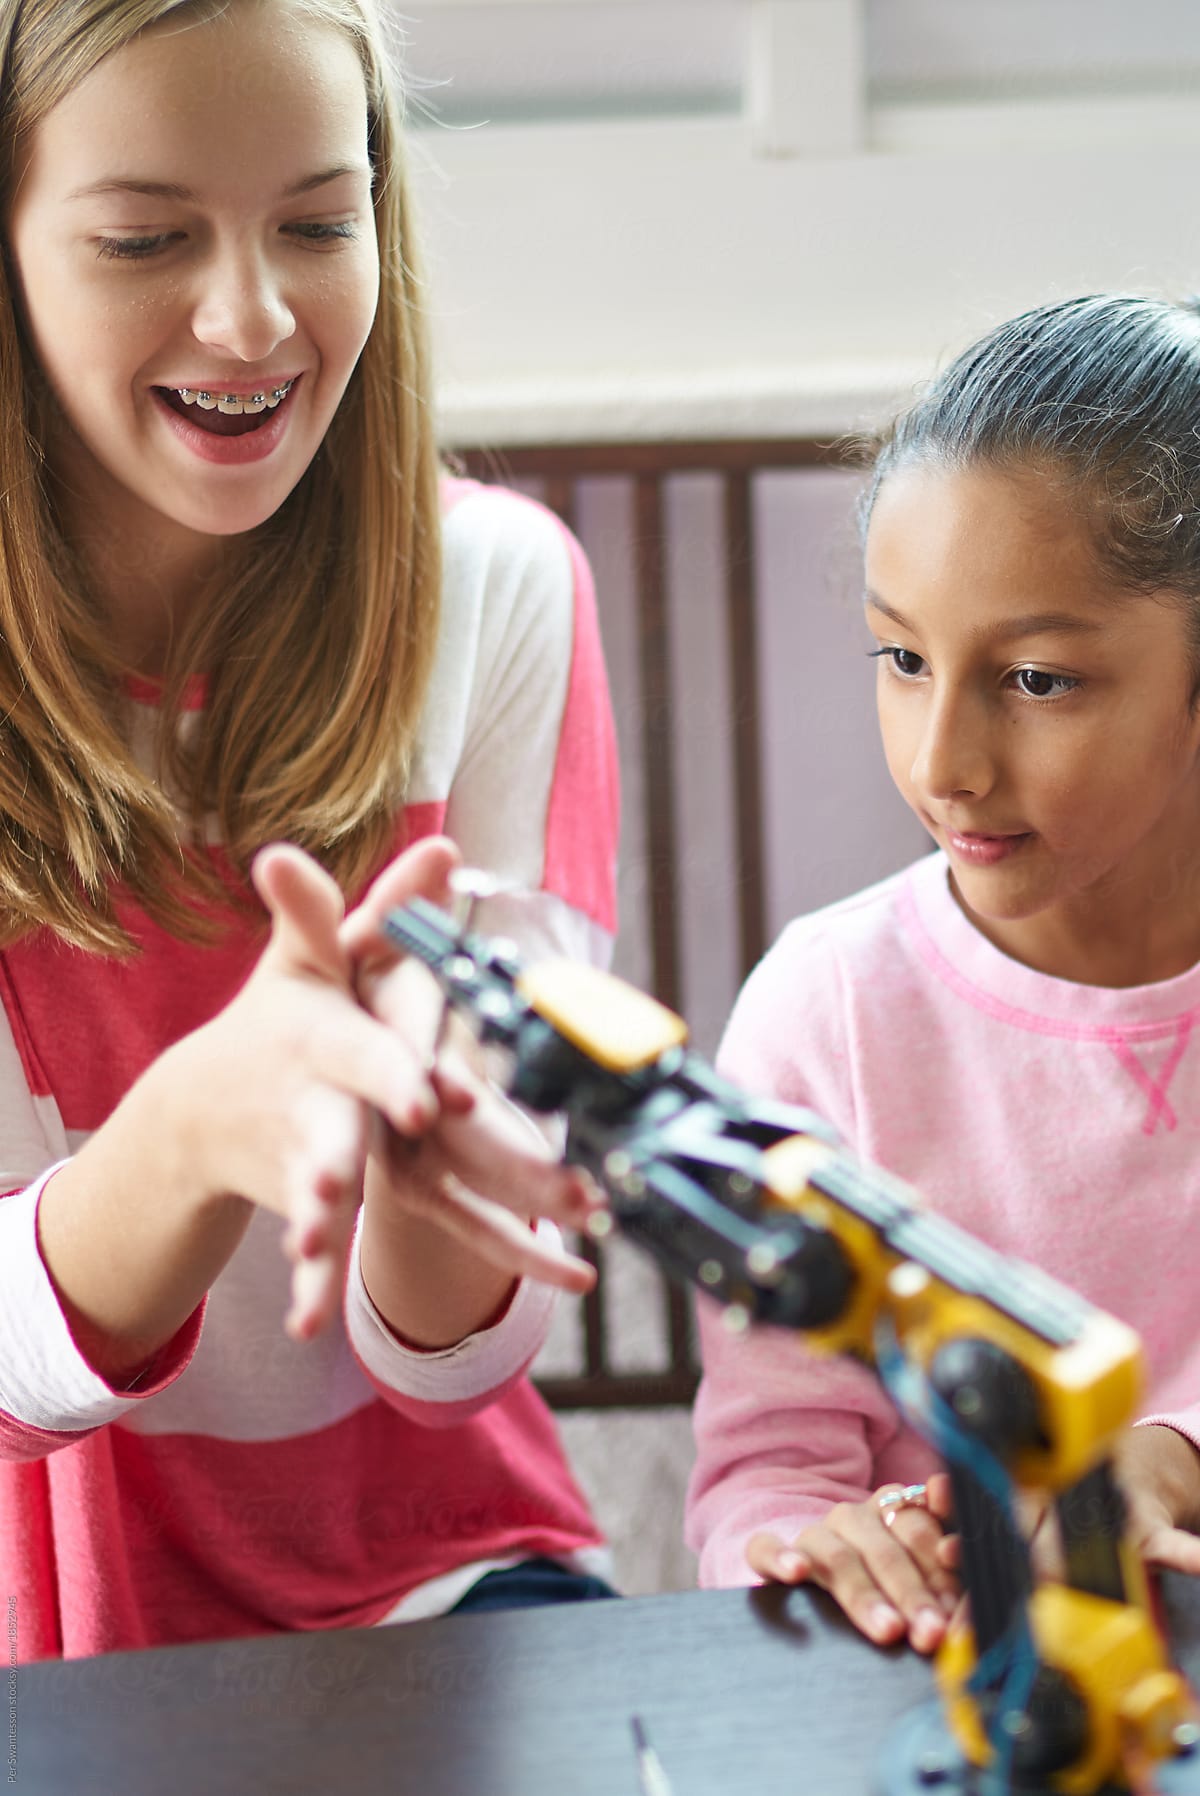 Young girls learning robotics